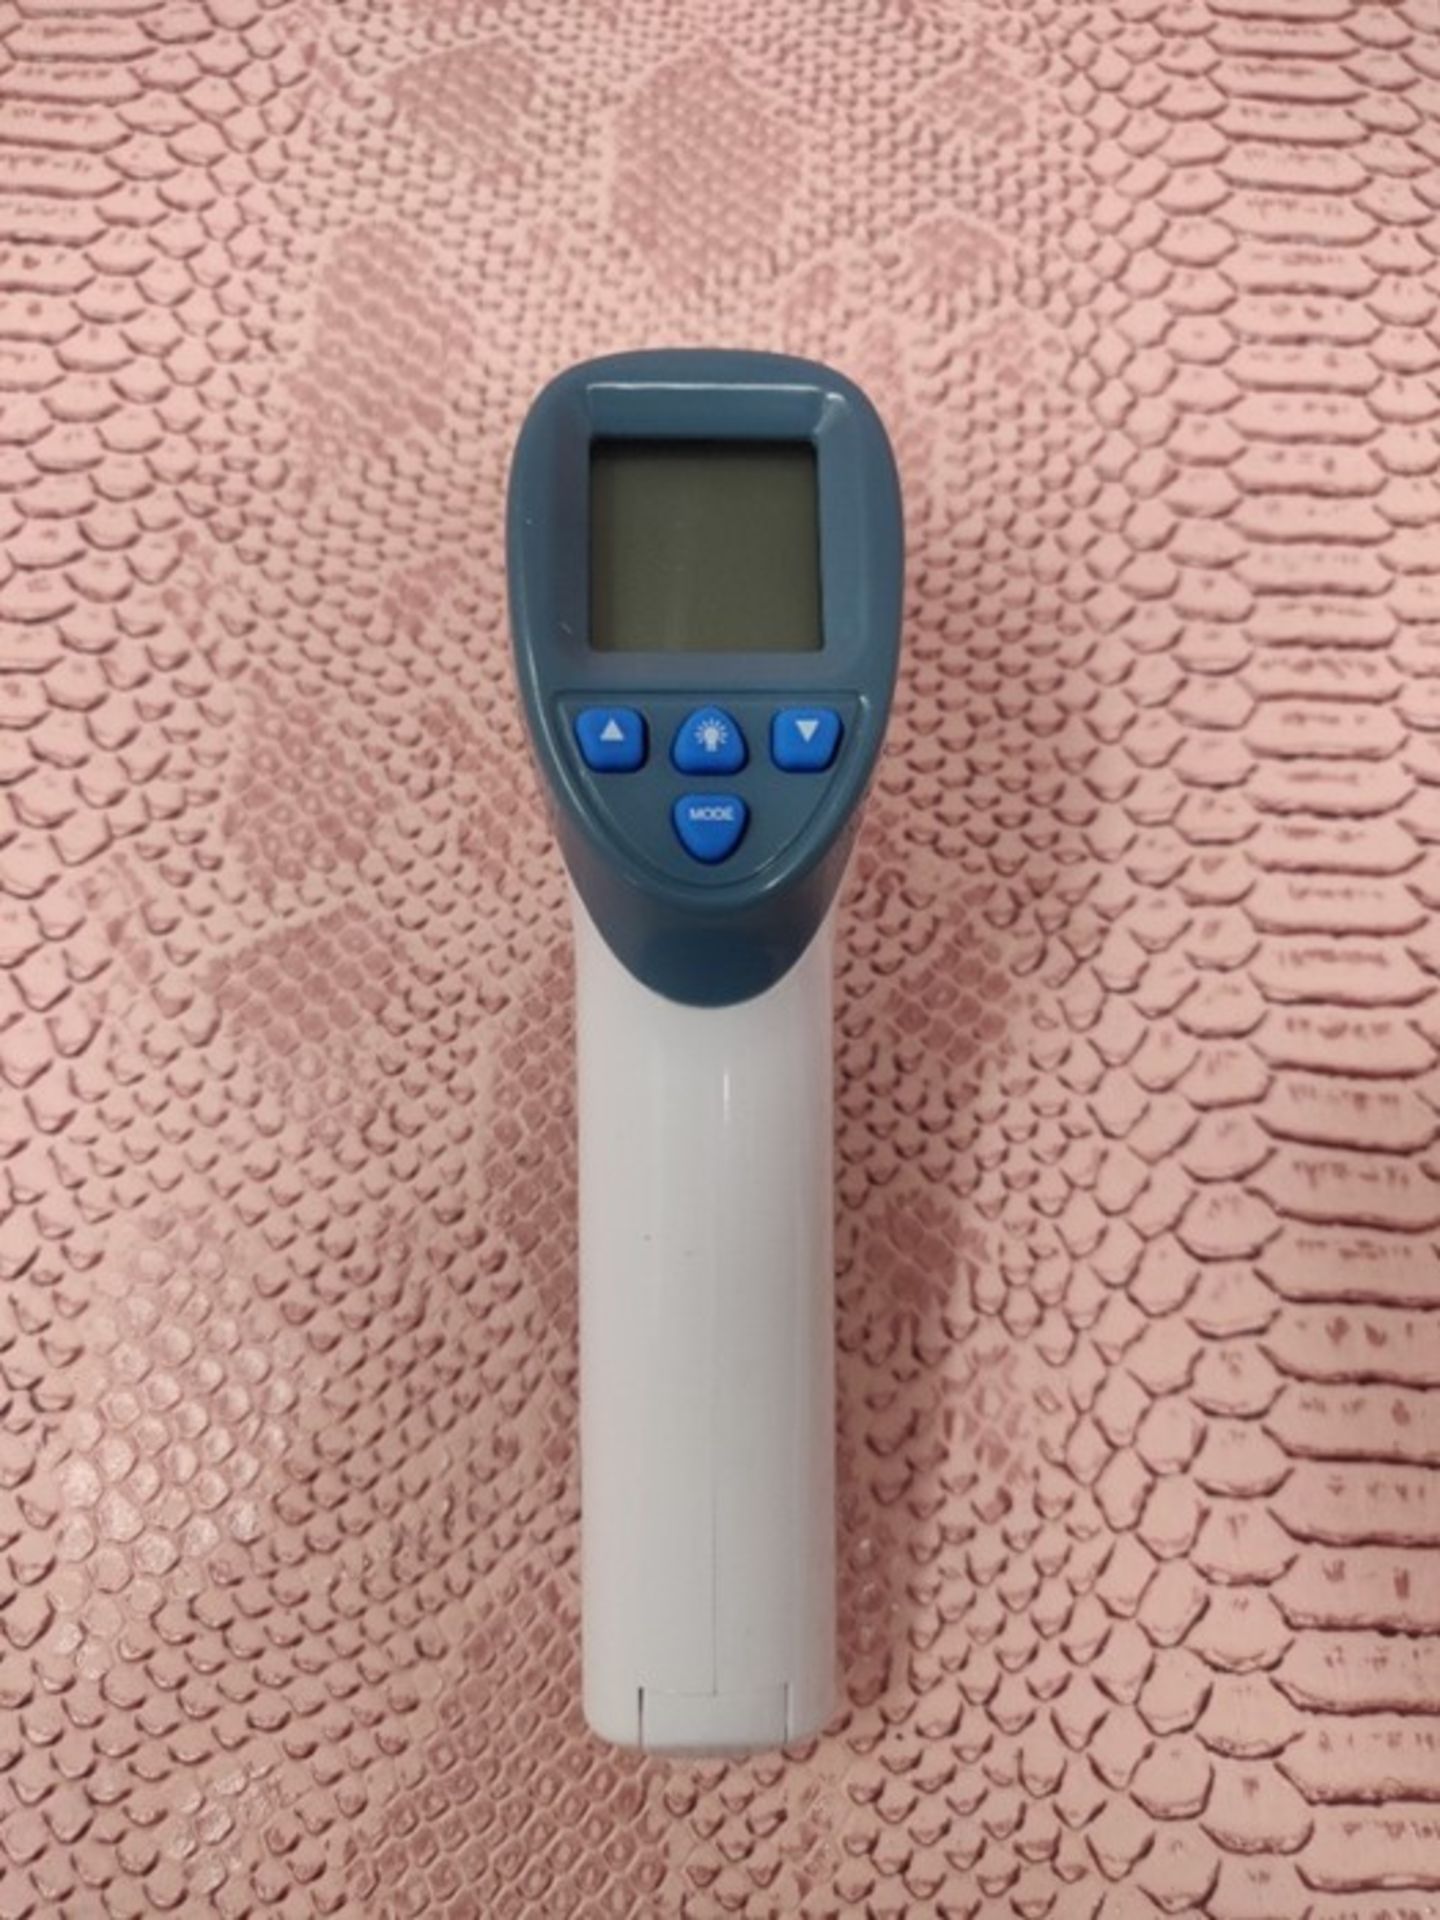 Handheld Digital LCD Temperature Thermometer Laser Non-Contact IR Infrared Gun - Image 3 of 3